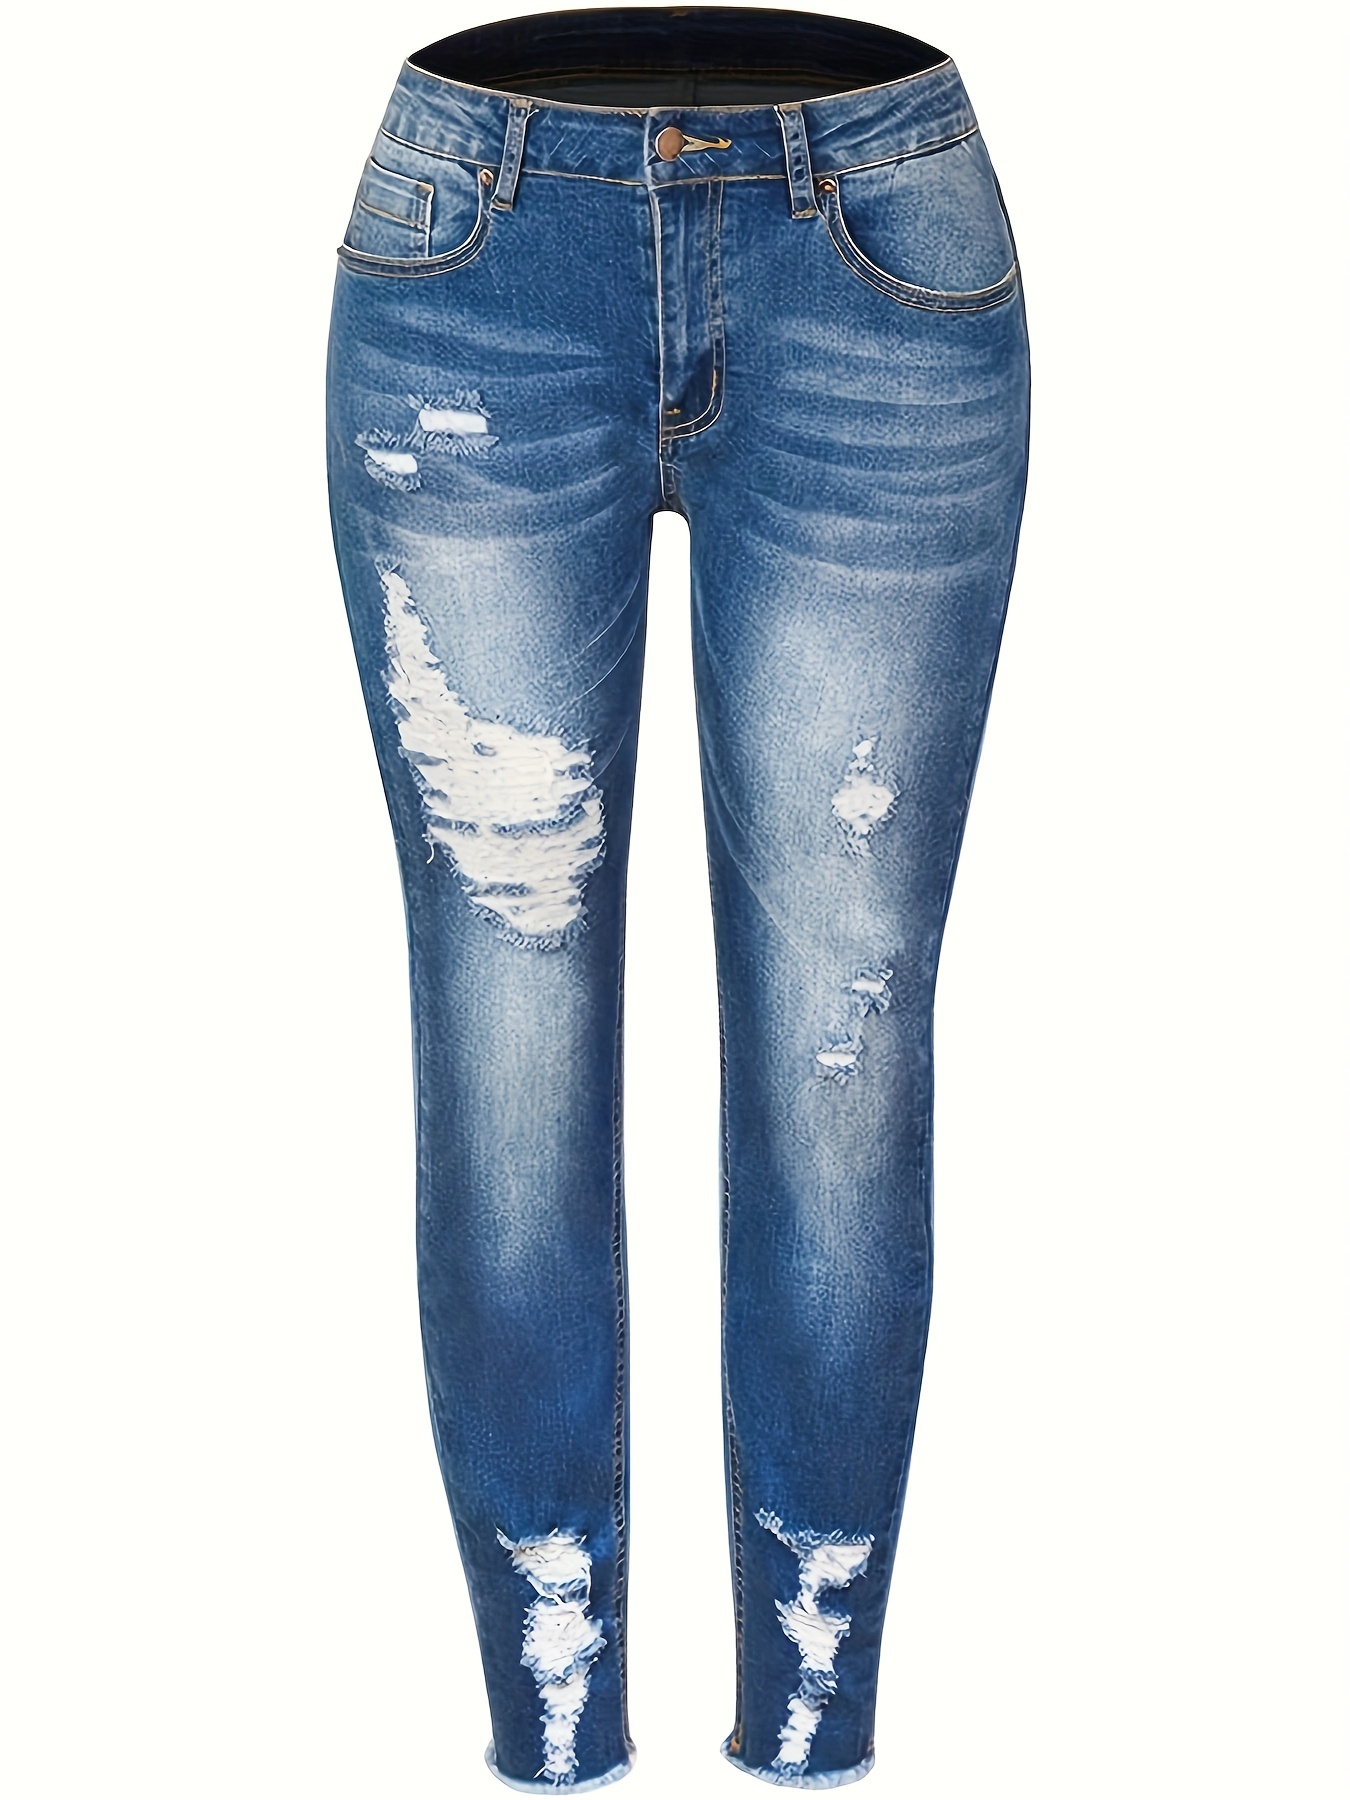 Blue * Trim Waist Skinny Jeans, Slim Fit Ripped Holes High Stretch Tight  Jeans, Women's Denim Jeans & Clothing